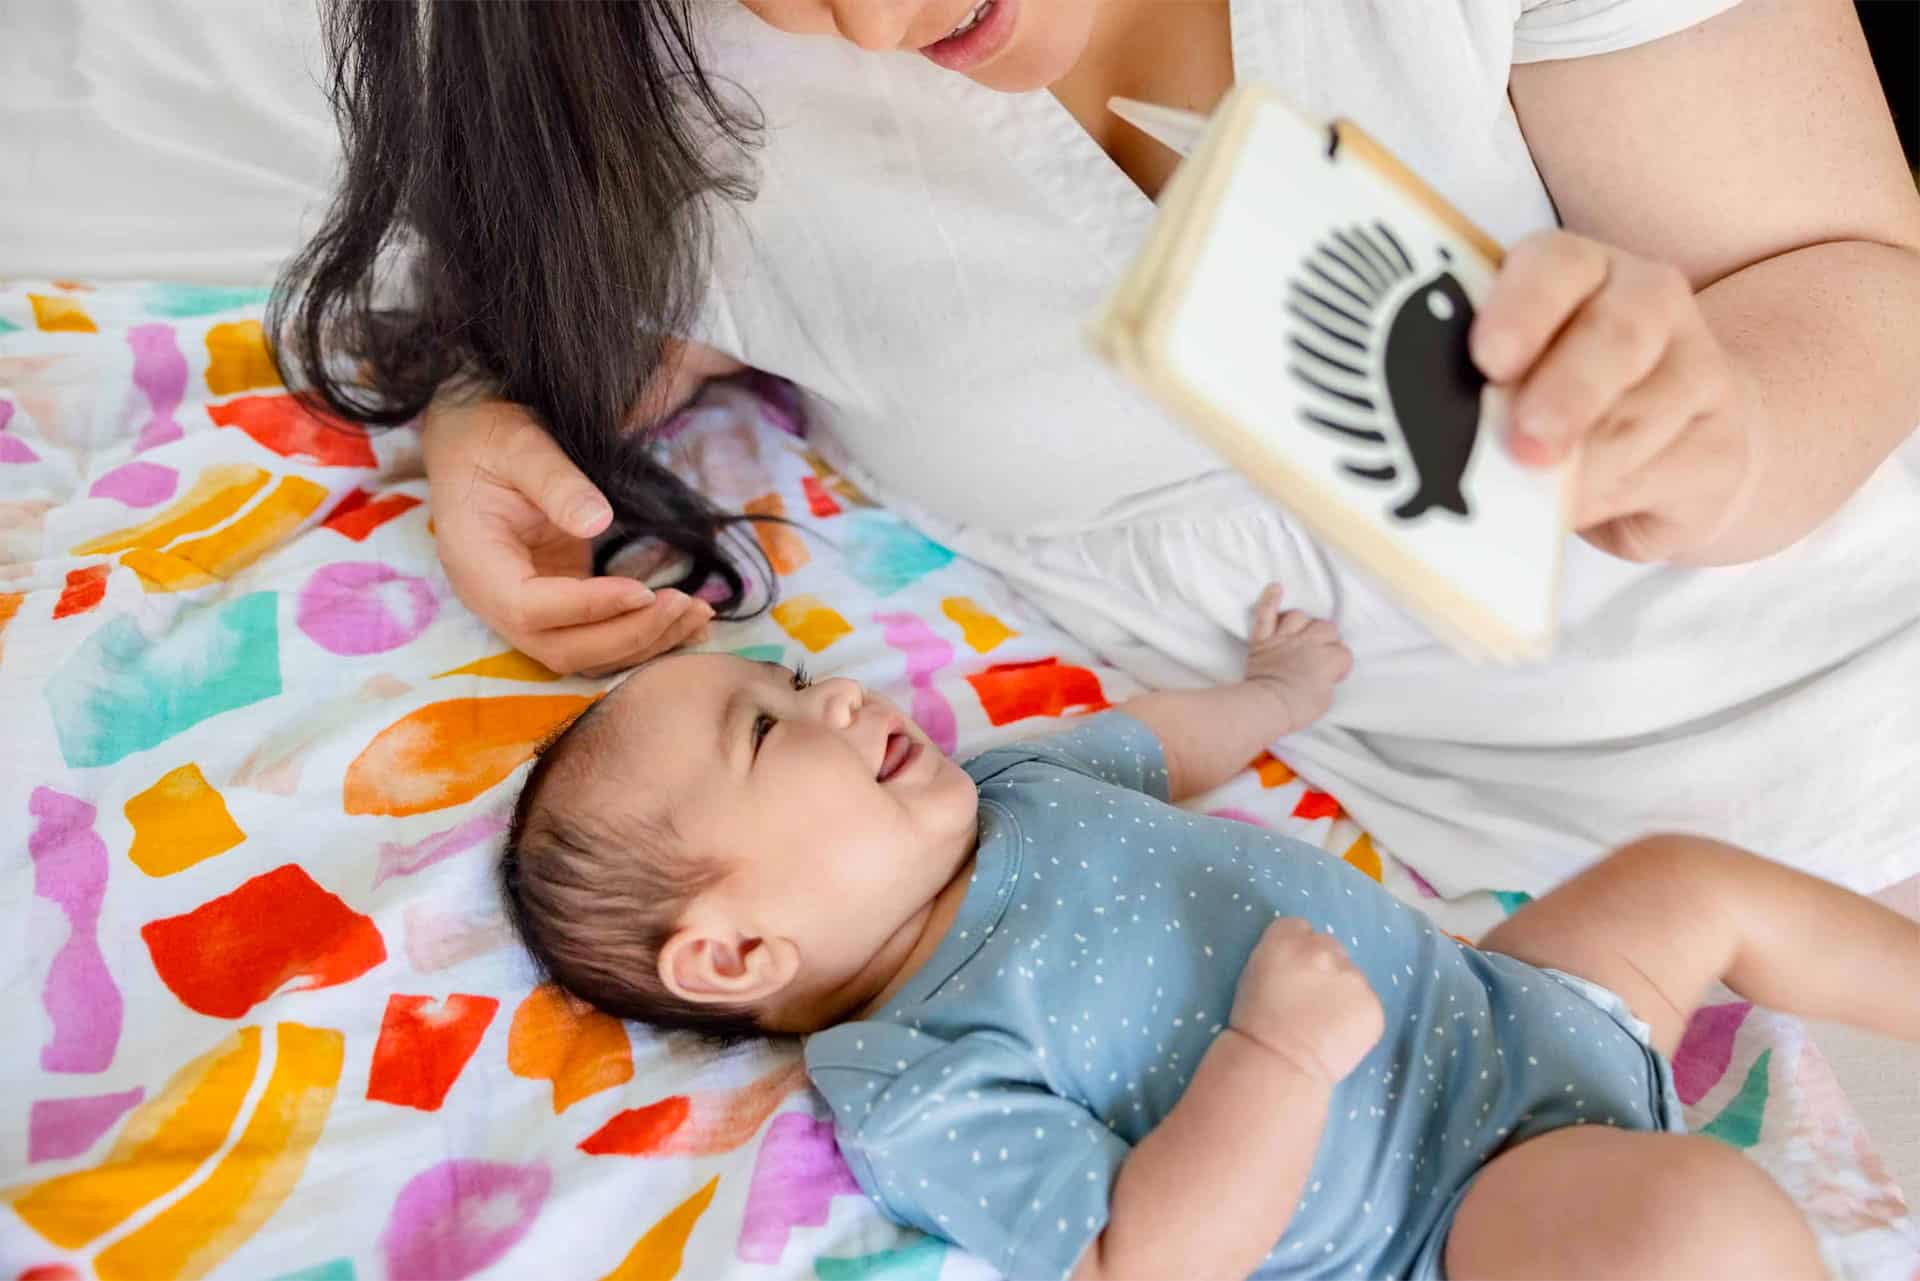 15+ Best Gifts for New Parents - Milk Drunk